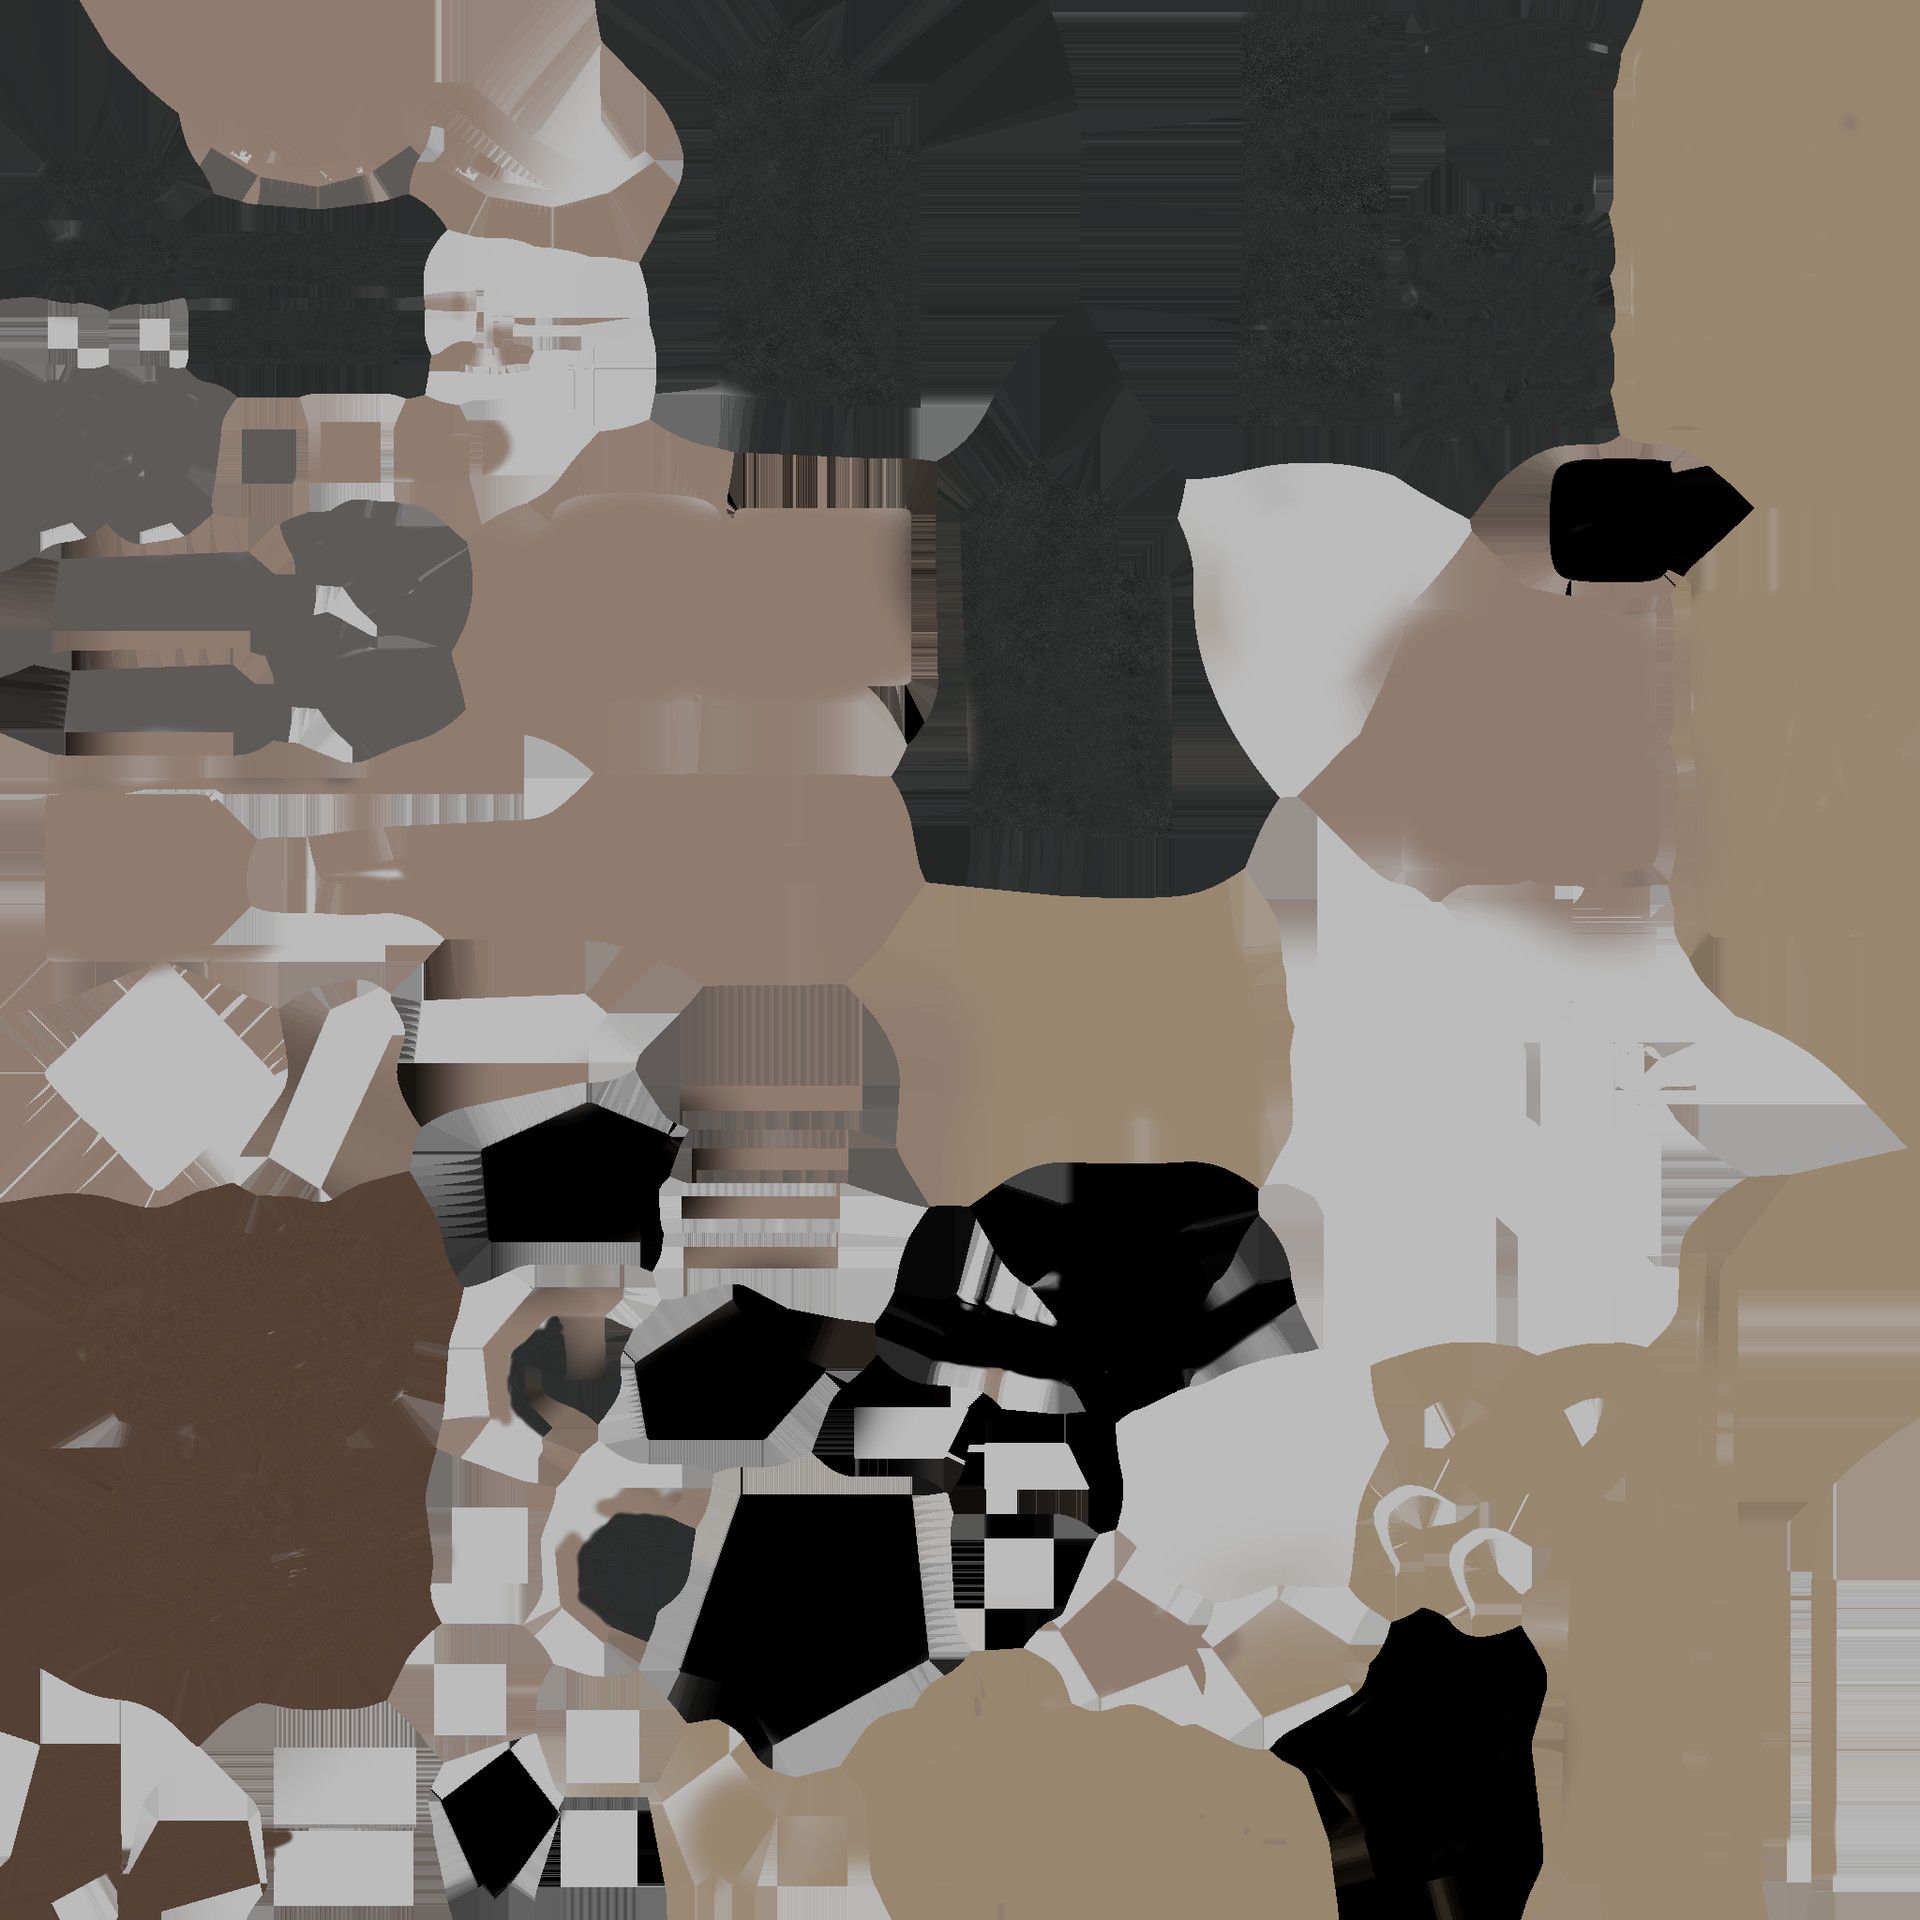 A shattered and pixelated image of a man's face, with shades of brown, black, and white. The image is composed of various geometric shapes and squares. - Star Trek